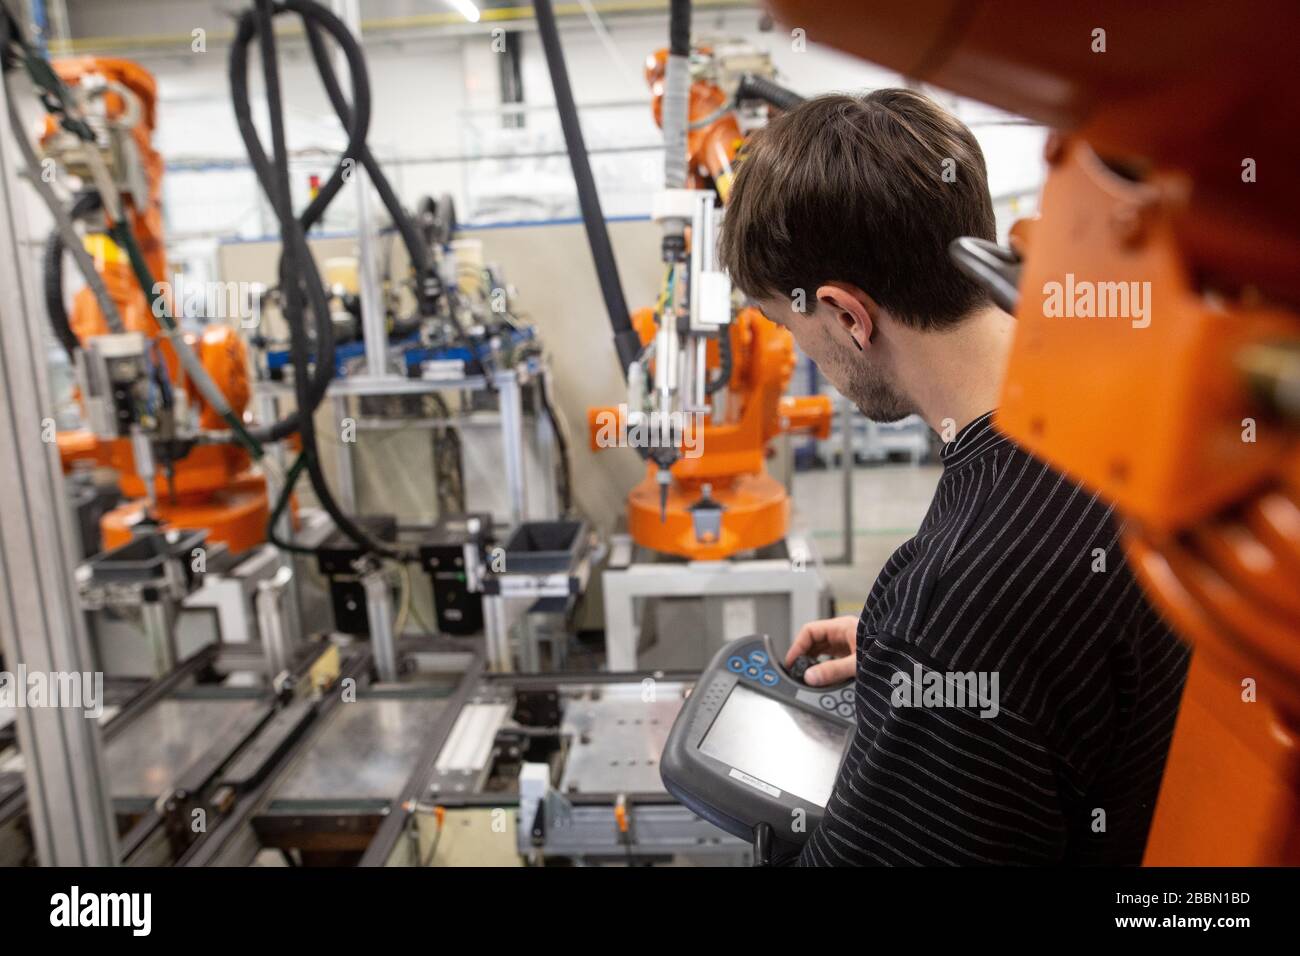 Young man programming industrial automatic robot in automotive industry, industrial concept Stock Photo